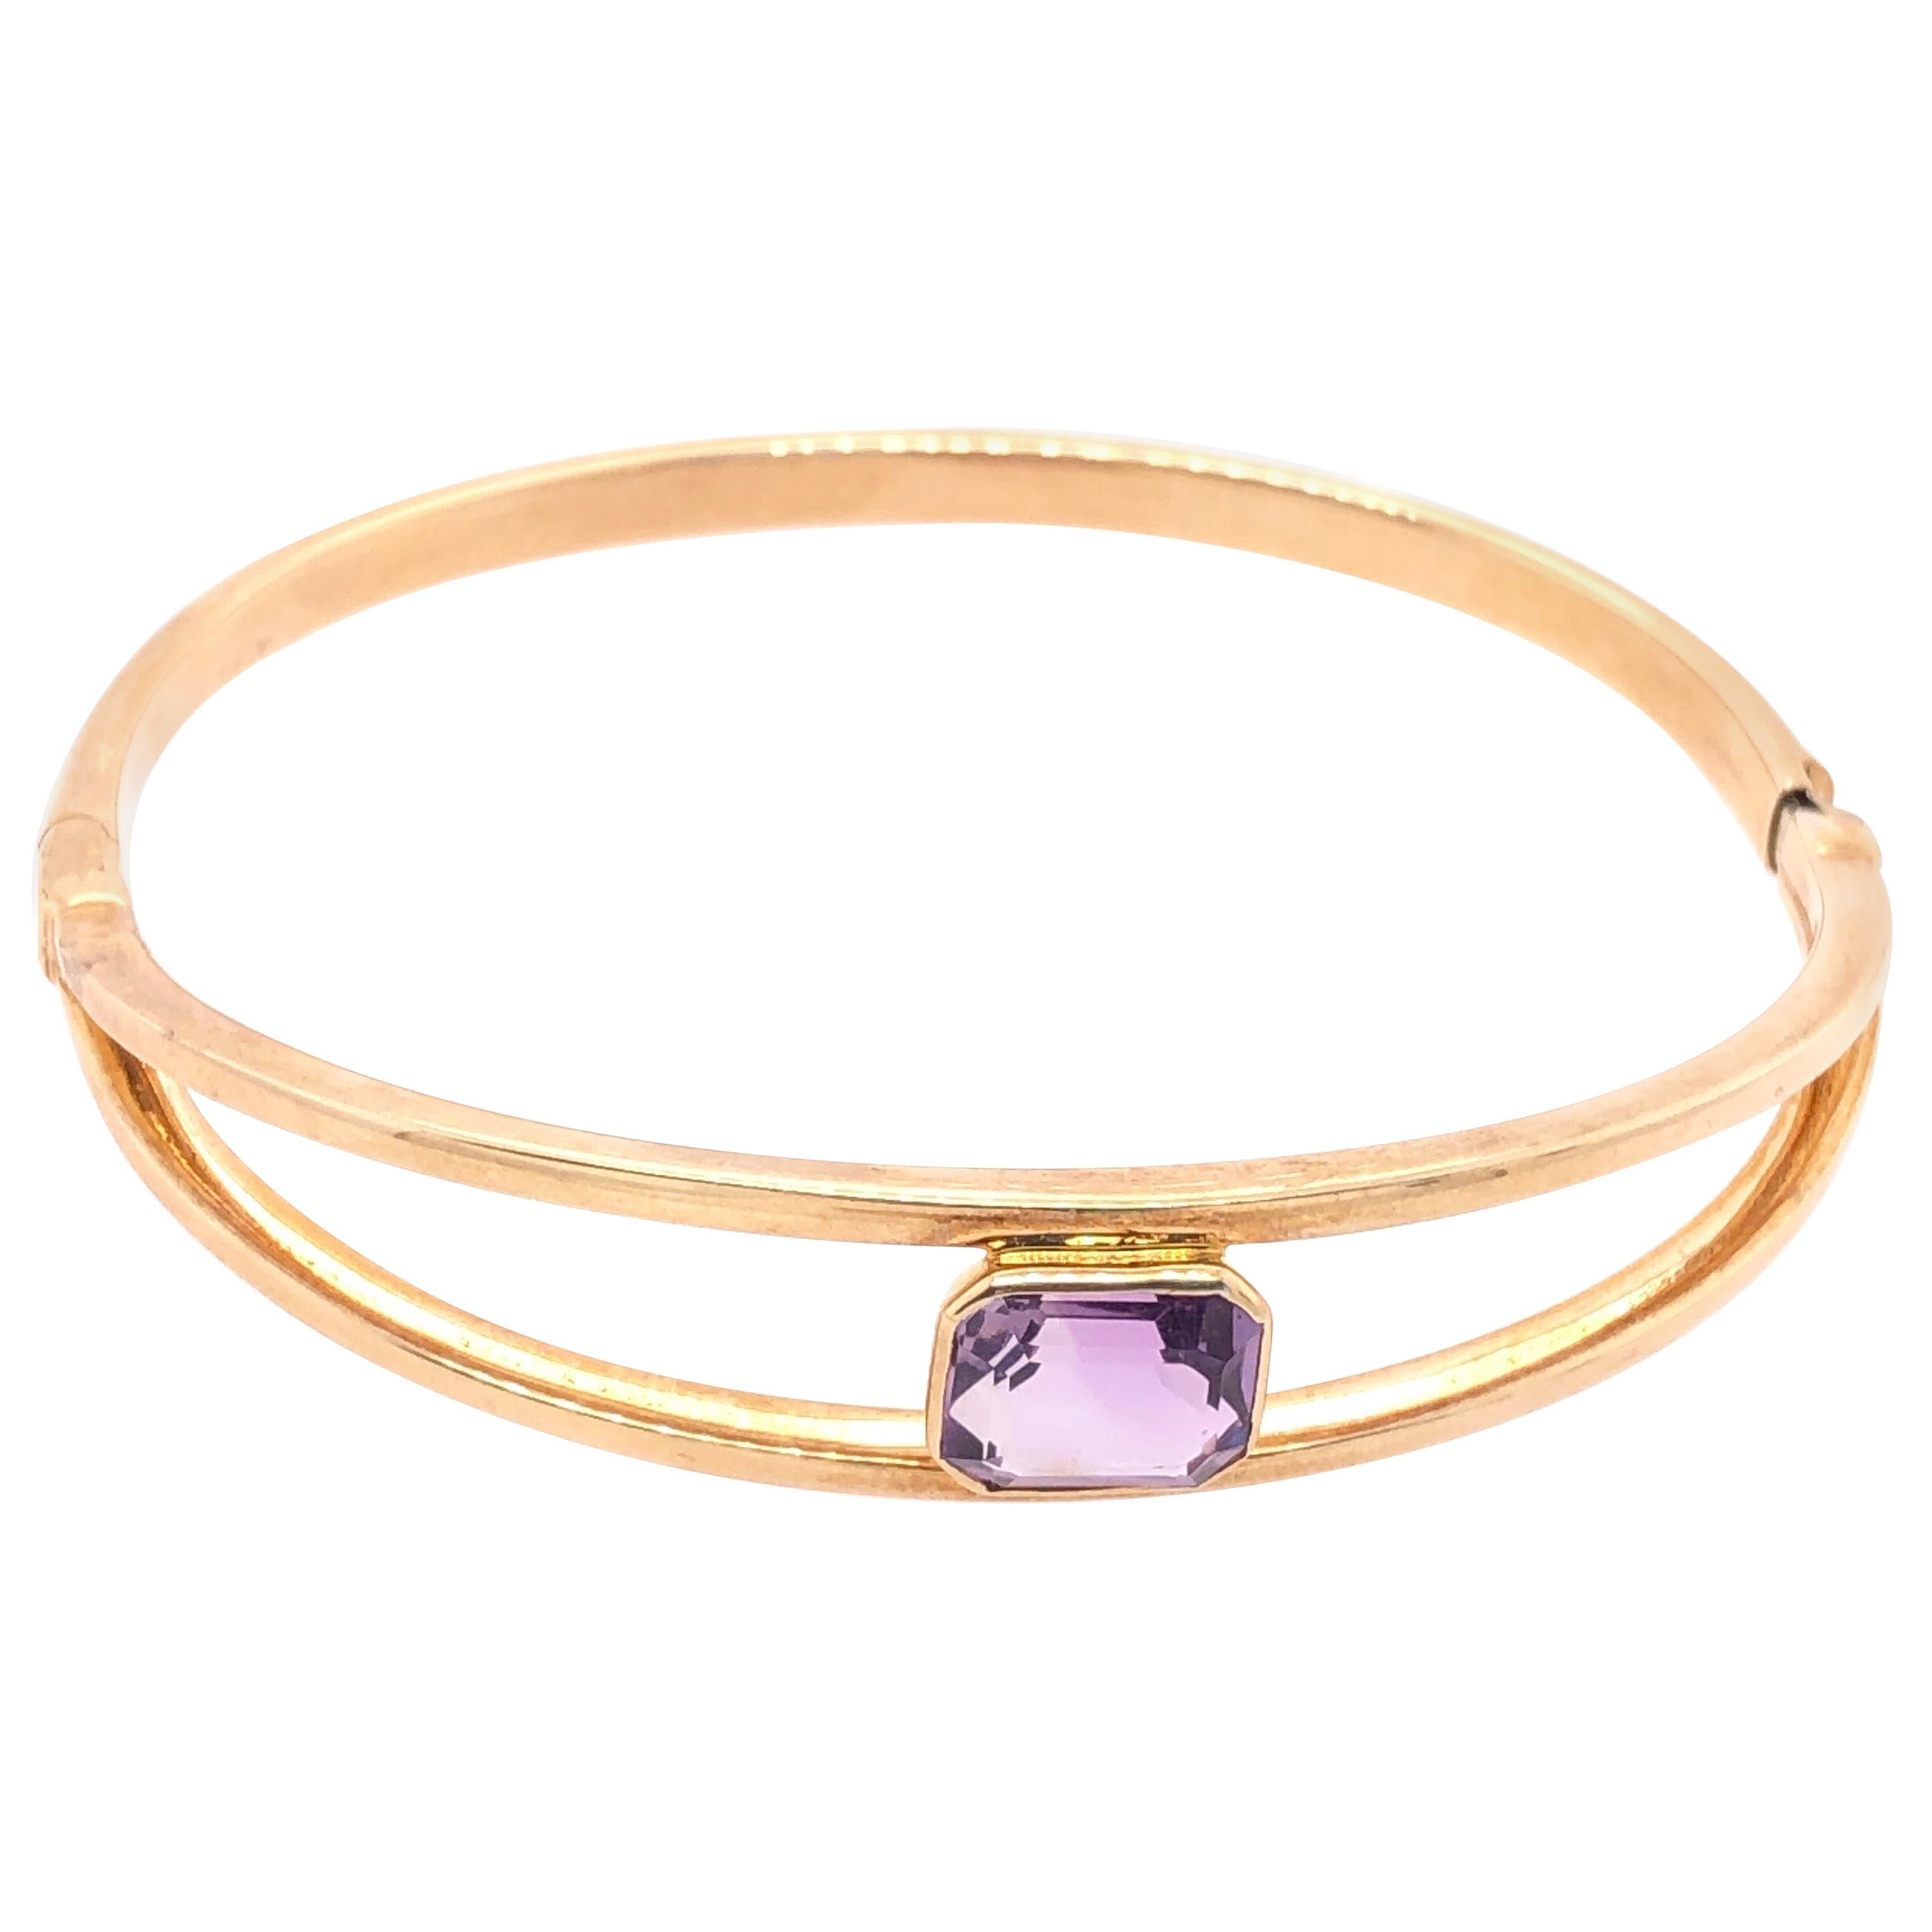 14 Karat Yellow Gold 7.8 Fancy Link Bangle with Square Amethyst Solitaire For Sale